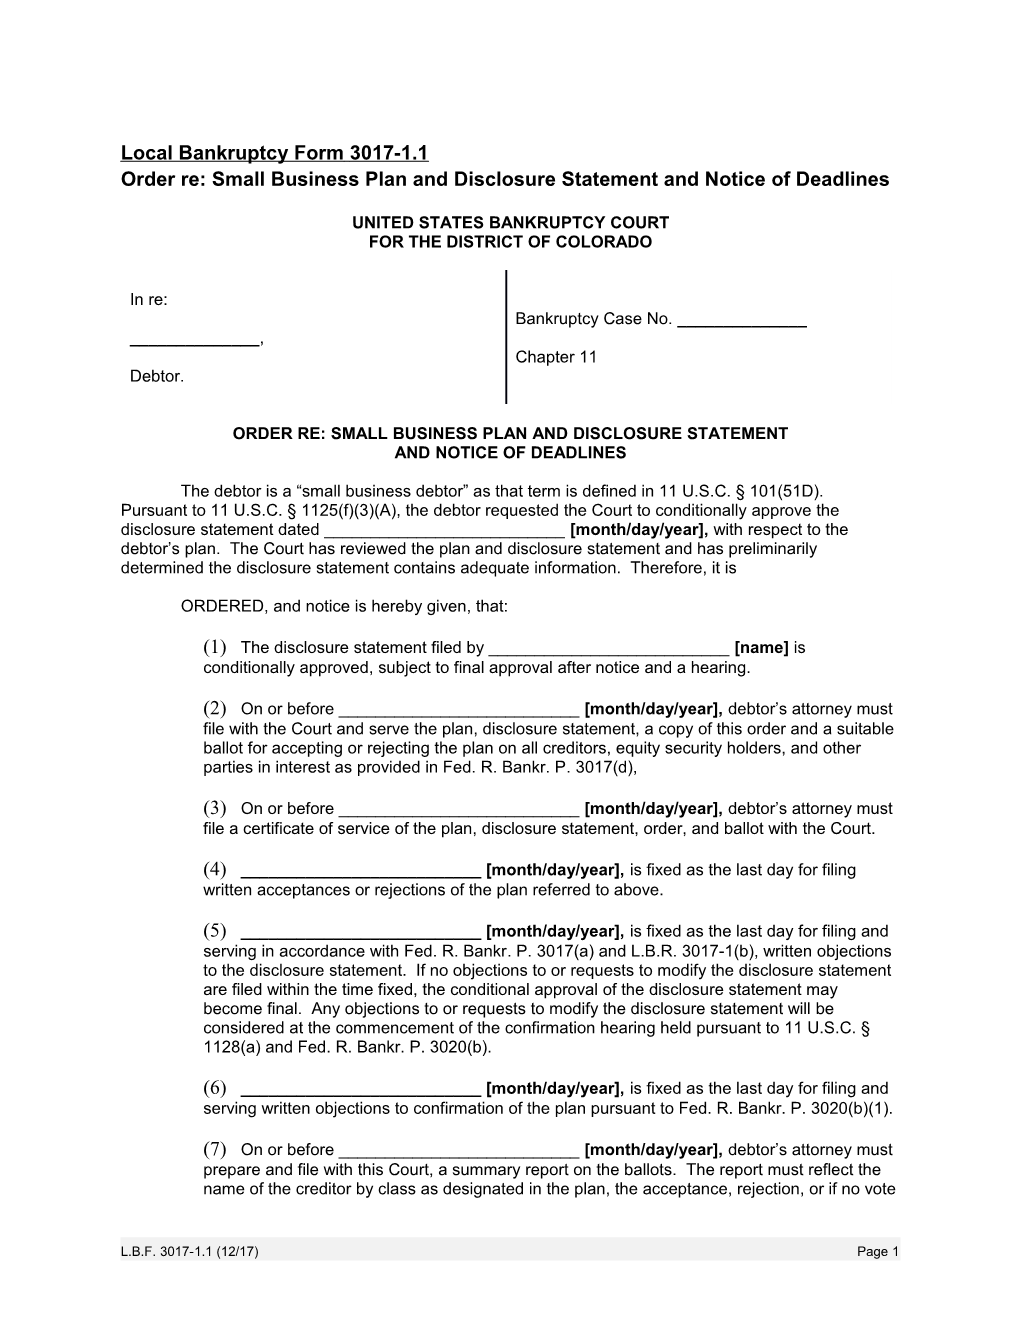 Order Re: Small Business Plan and Disclosure Statement and Notice of Deadlines